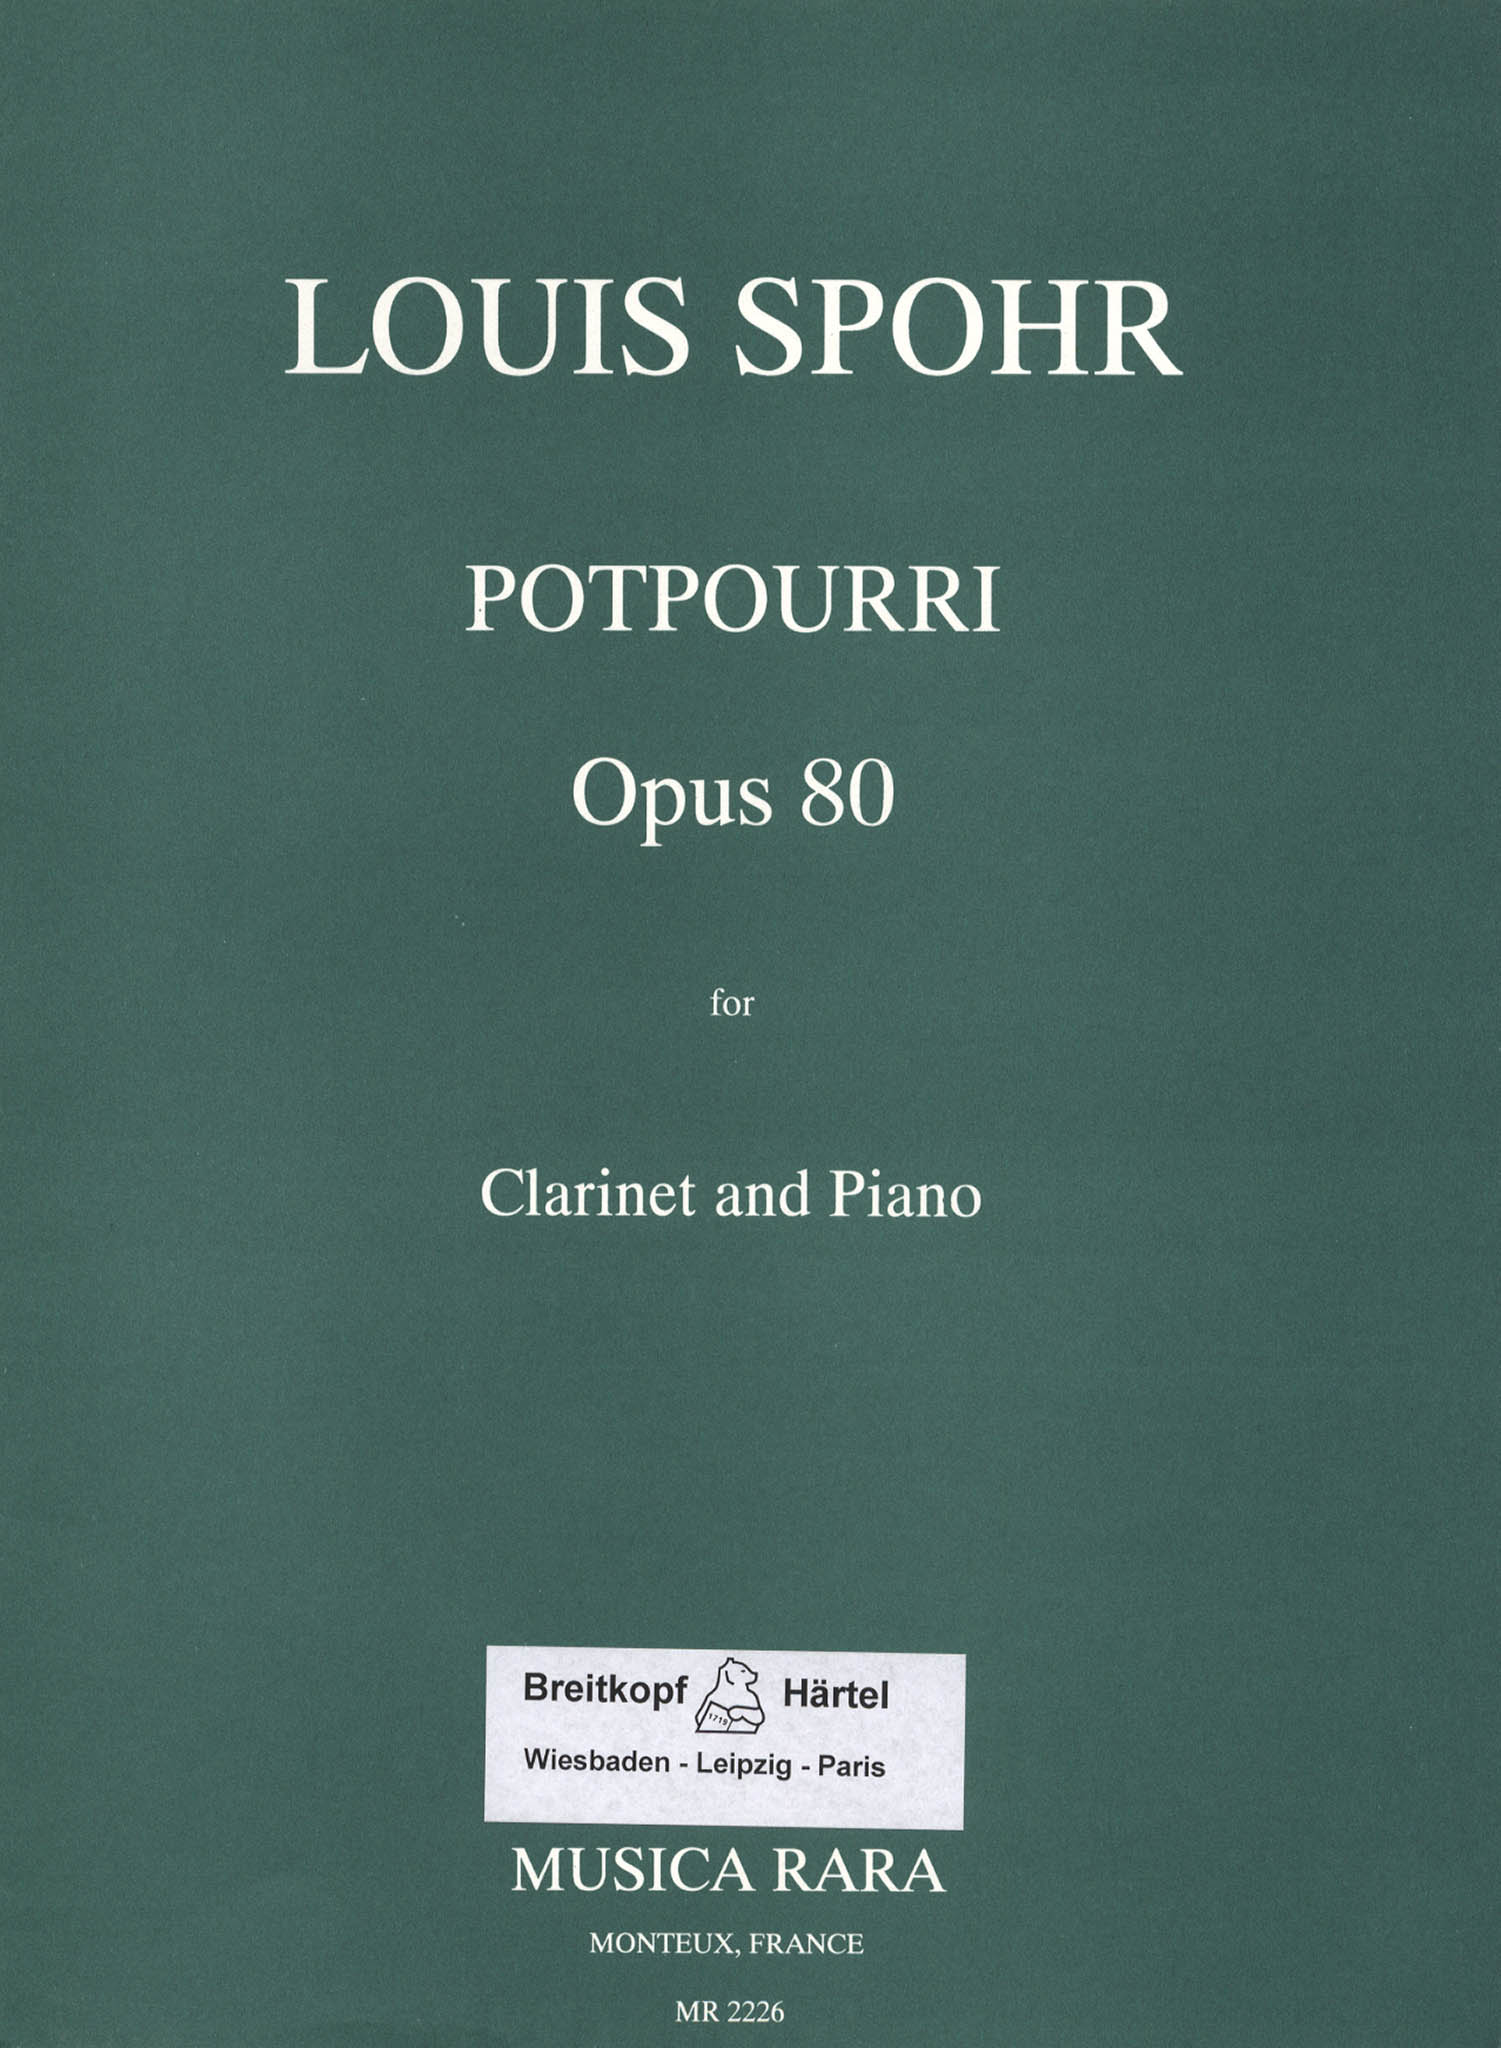 Spohr Potpourri on Themes of Winter, Op. 80 Cover